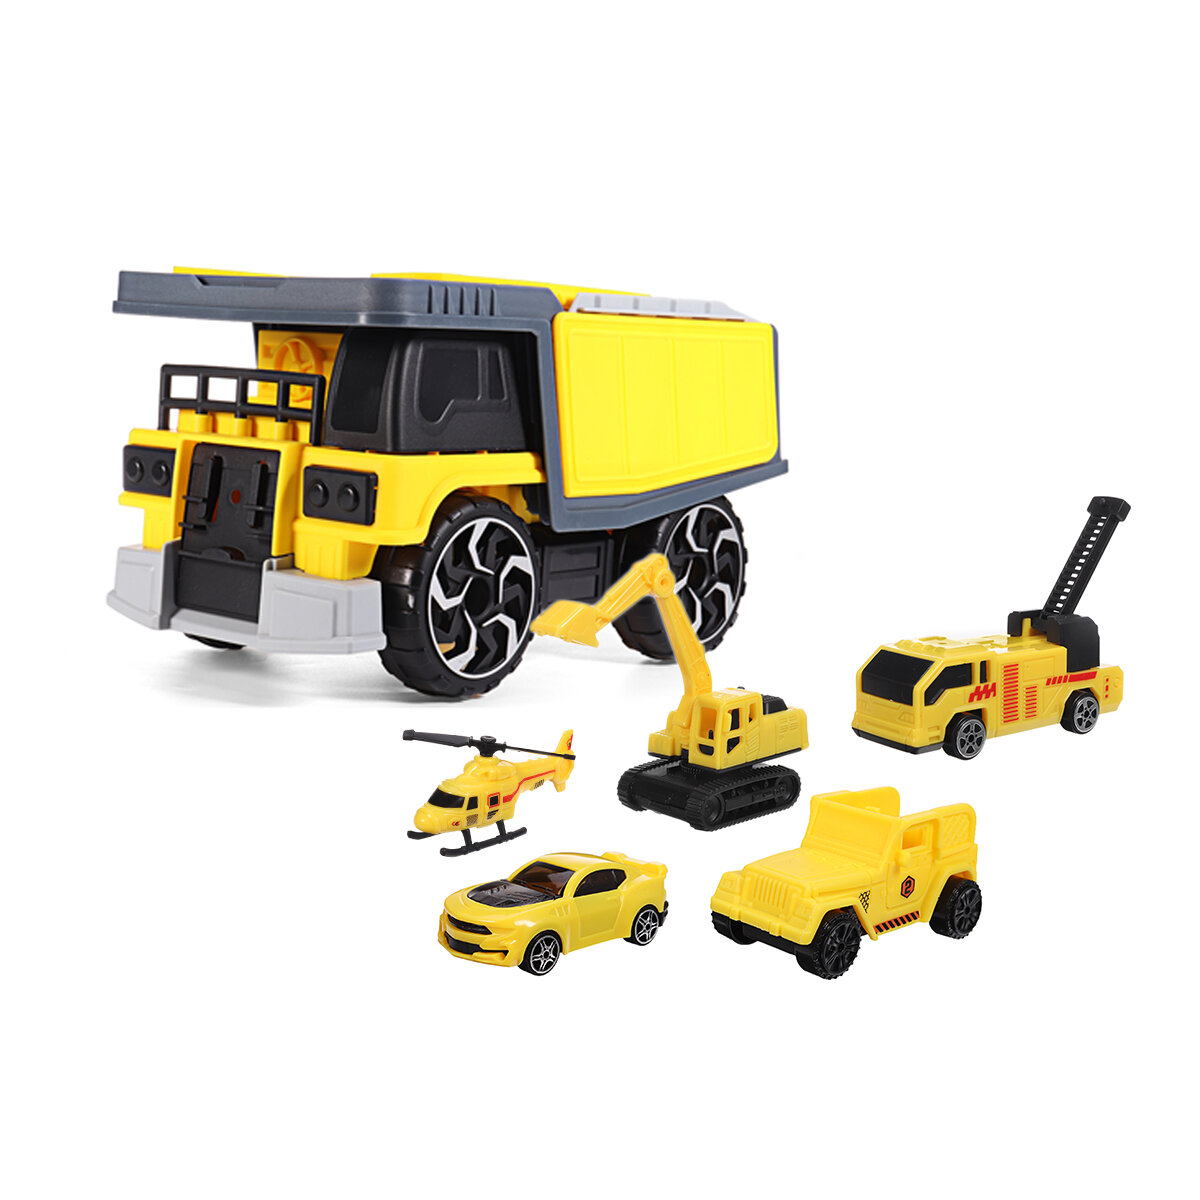 Simulation Inertia Deformation Track Engineering Vehicle Diecast Car Model Toy with Storage Parking 